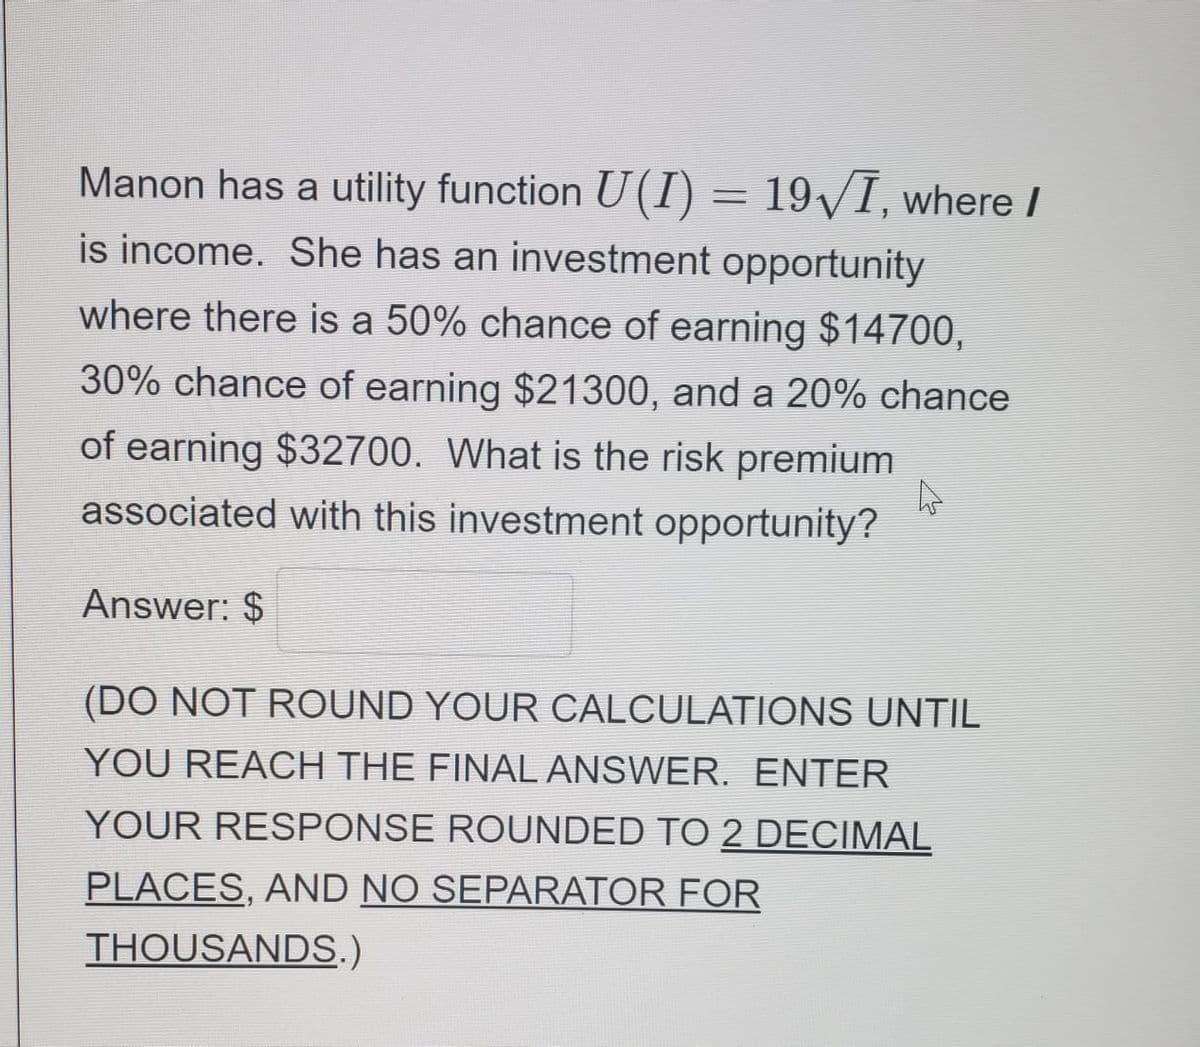 Manon has a utility function U(I) = 19/I, where I
is income. She has an investment opportunity
where there is a 50% chance of earning $14700,
30% chance of earning $21300, and a 20% chance
of earning $32700. What is the risk premium
associated with this investment opportunity?
Answer: $
(DO NOT ROUND YOUR CALCULATIONS UNTIL
YOU REACH THE FINAL ANSWER. ENTER
YOUR RESPONSE ROUNDED TO 2 DECIMAL
PLACES, AND NO SEPARATOR FOR
THOUSANDS.)
